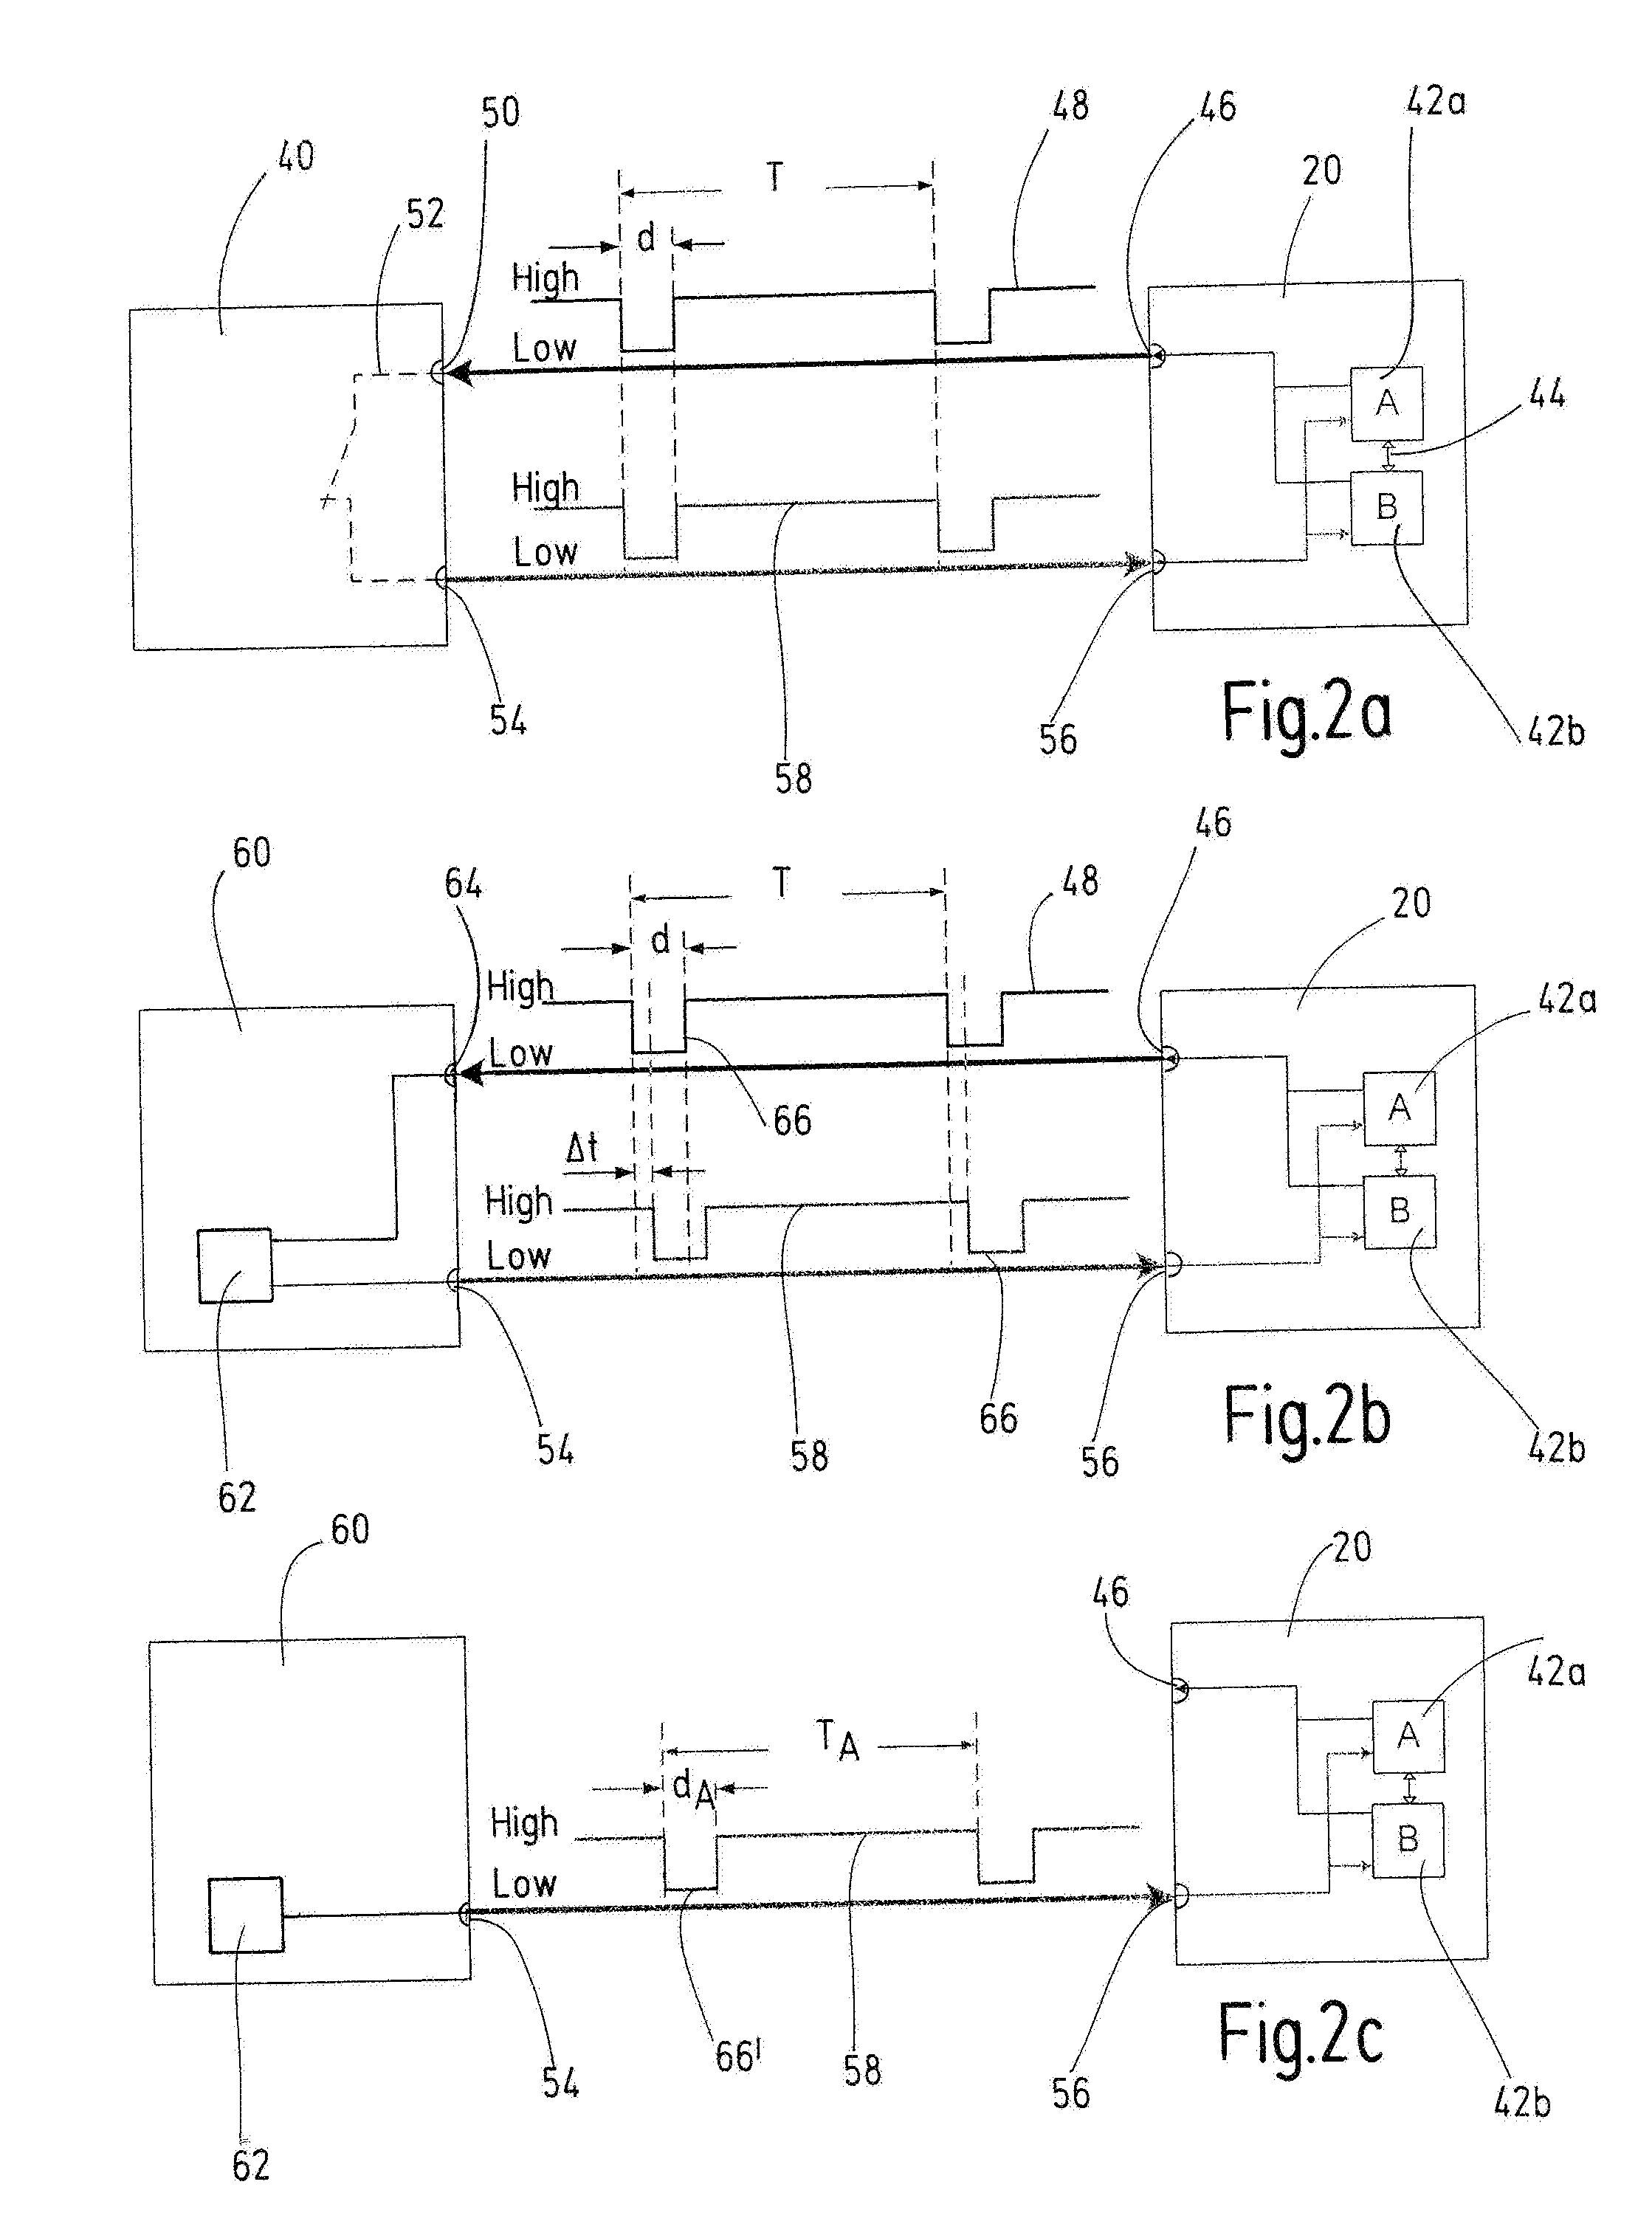 Safety control system having configurable inputs